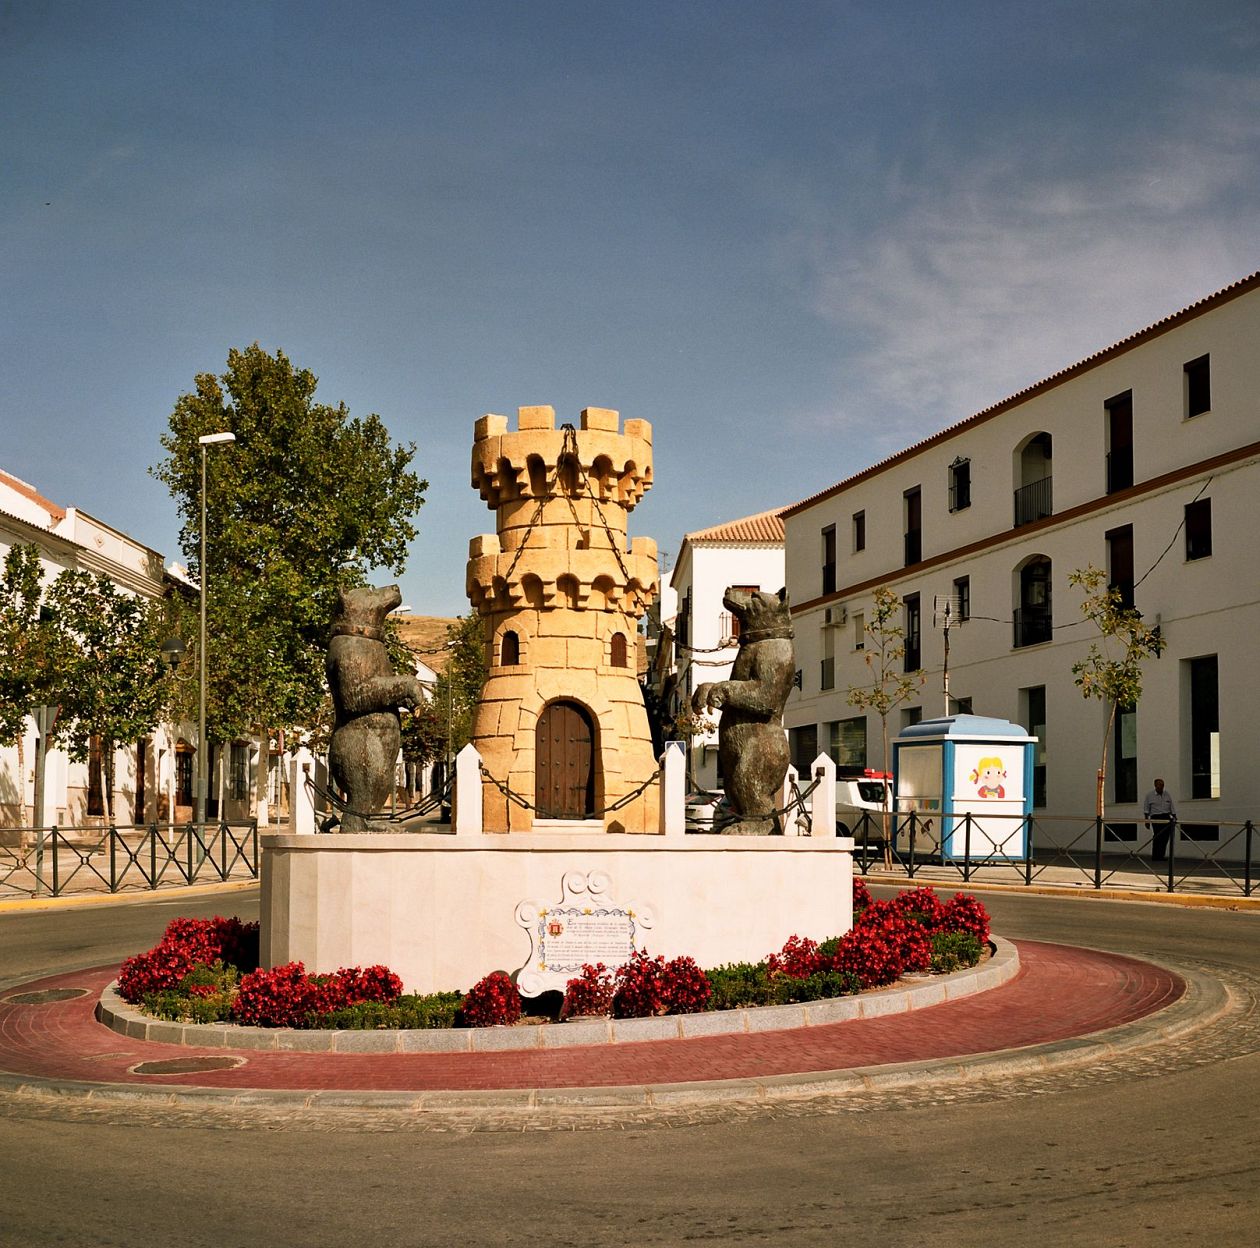 Fountain with a castle tower and two bears in Andalusia